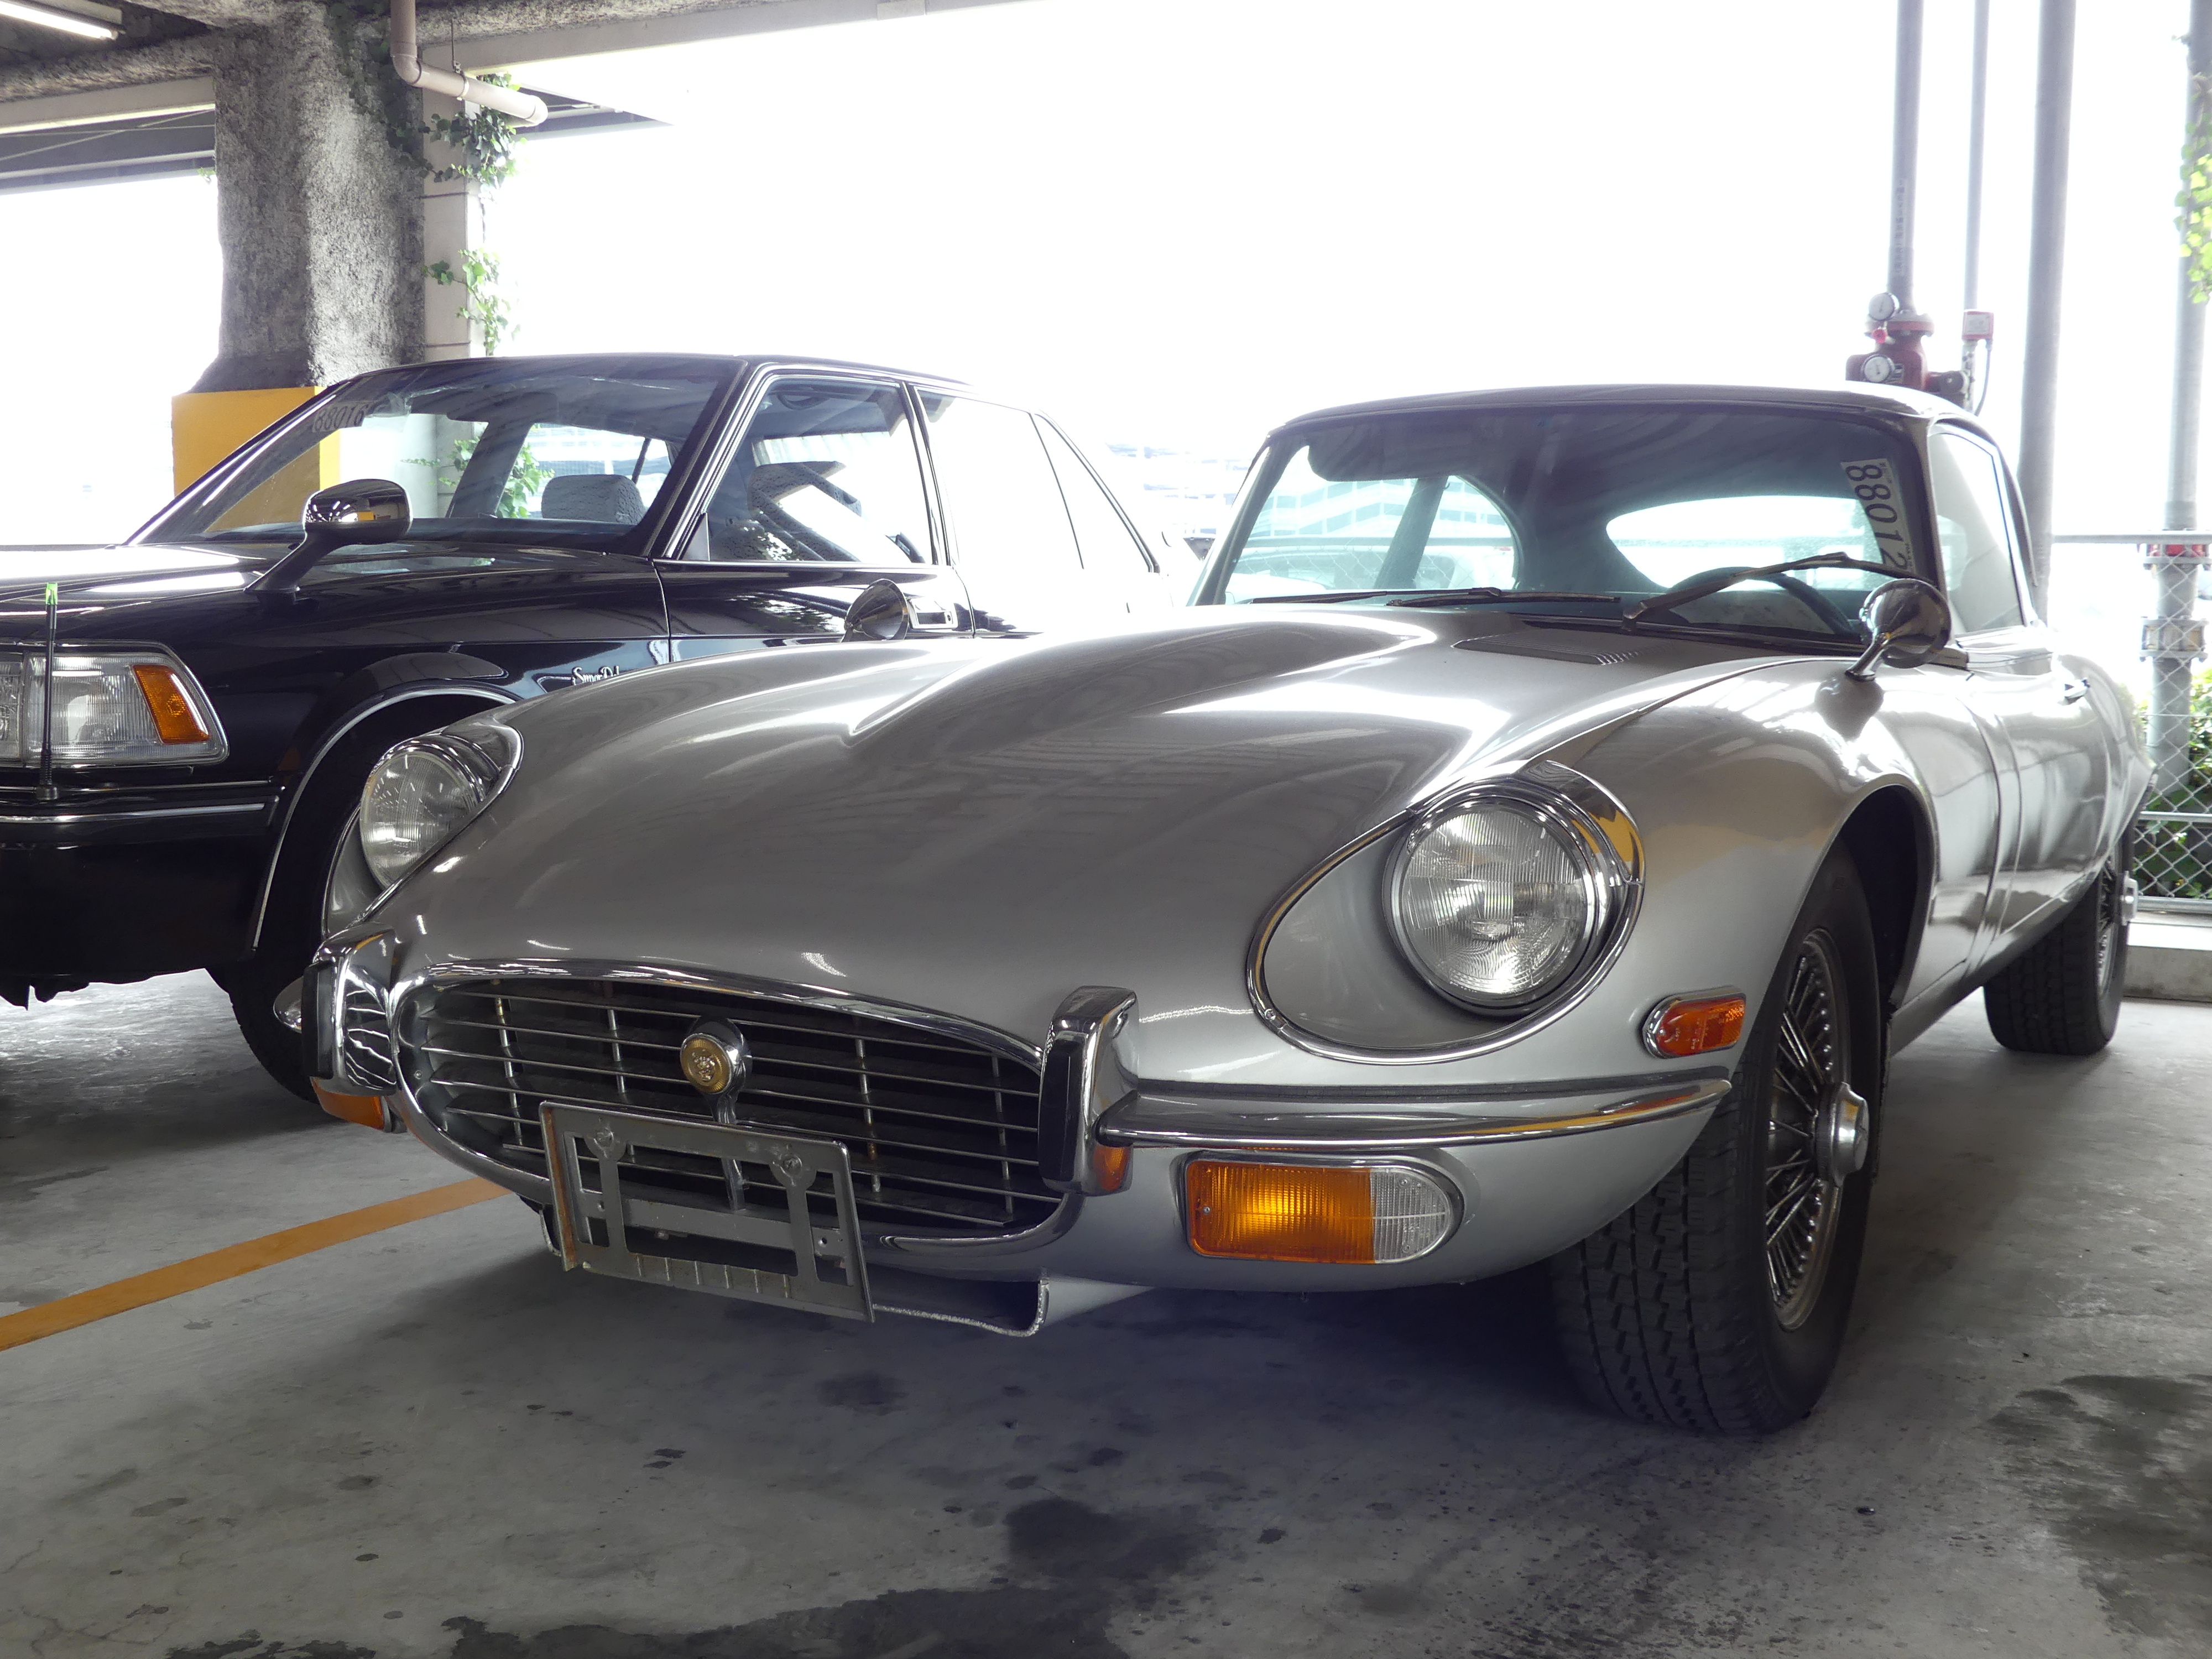 Older Classic Cars At Auction Japanese Car Auctions Integrity Exports